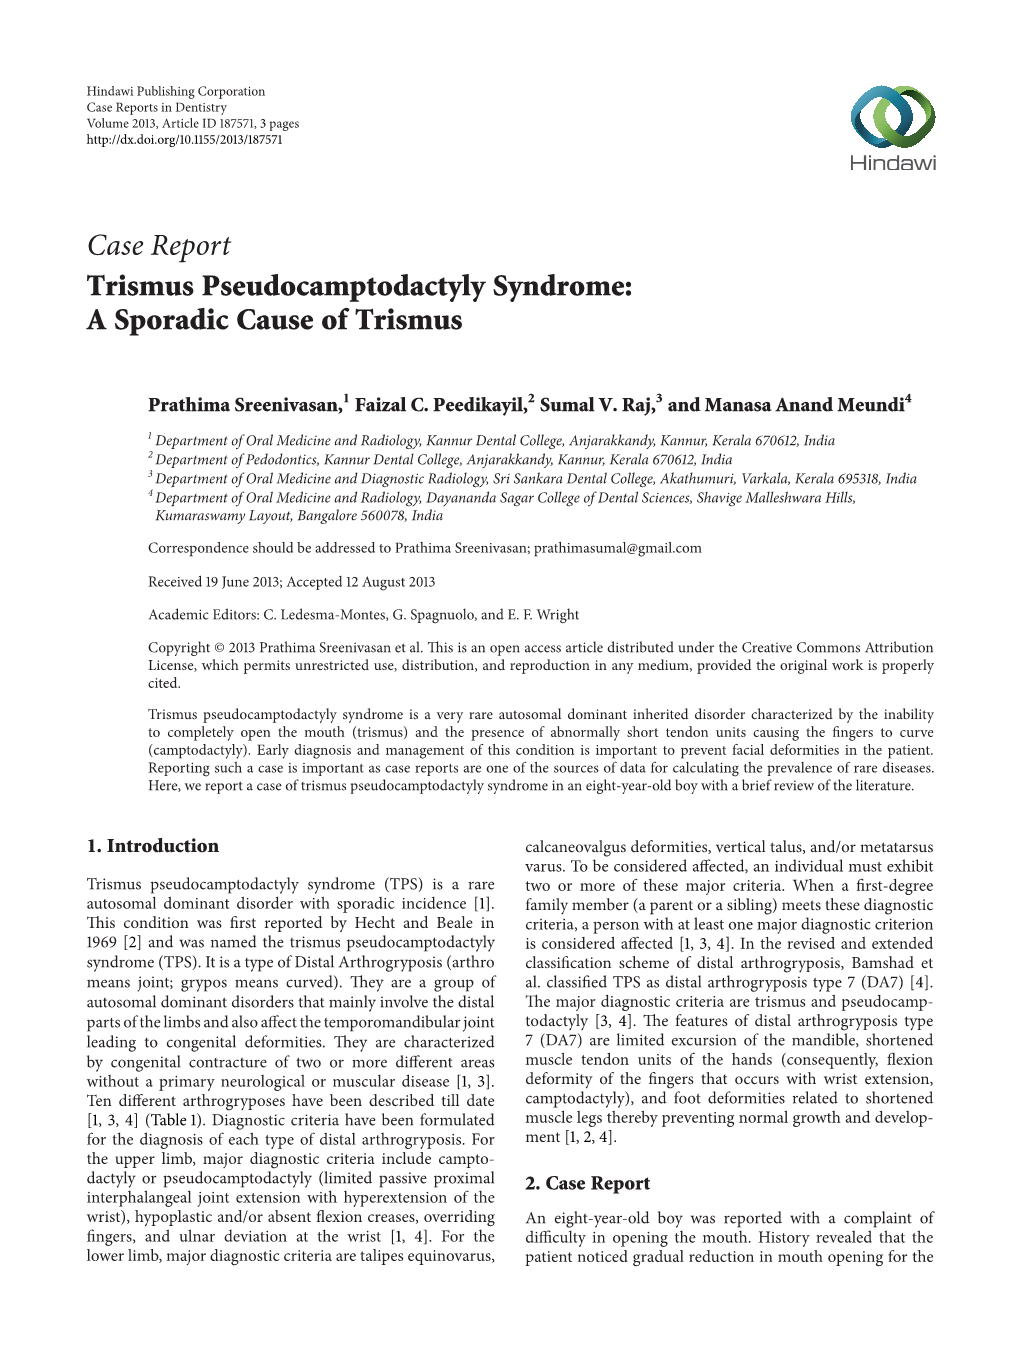 Case Report Trismus Pseudocamptodactyly Syndrome: a Sporadic Cause of Trismus